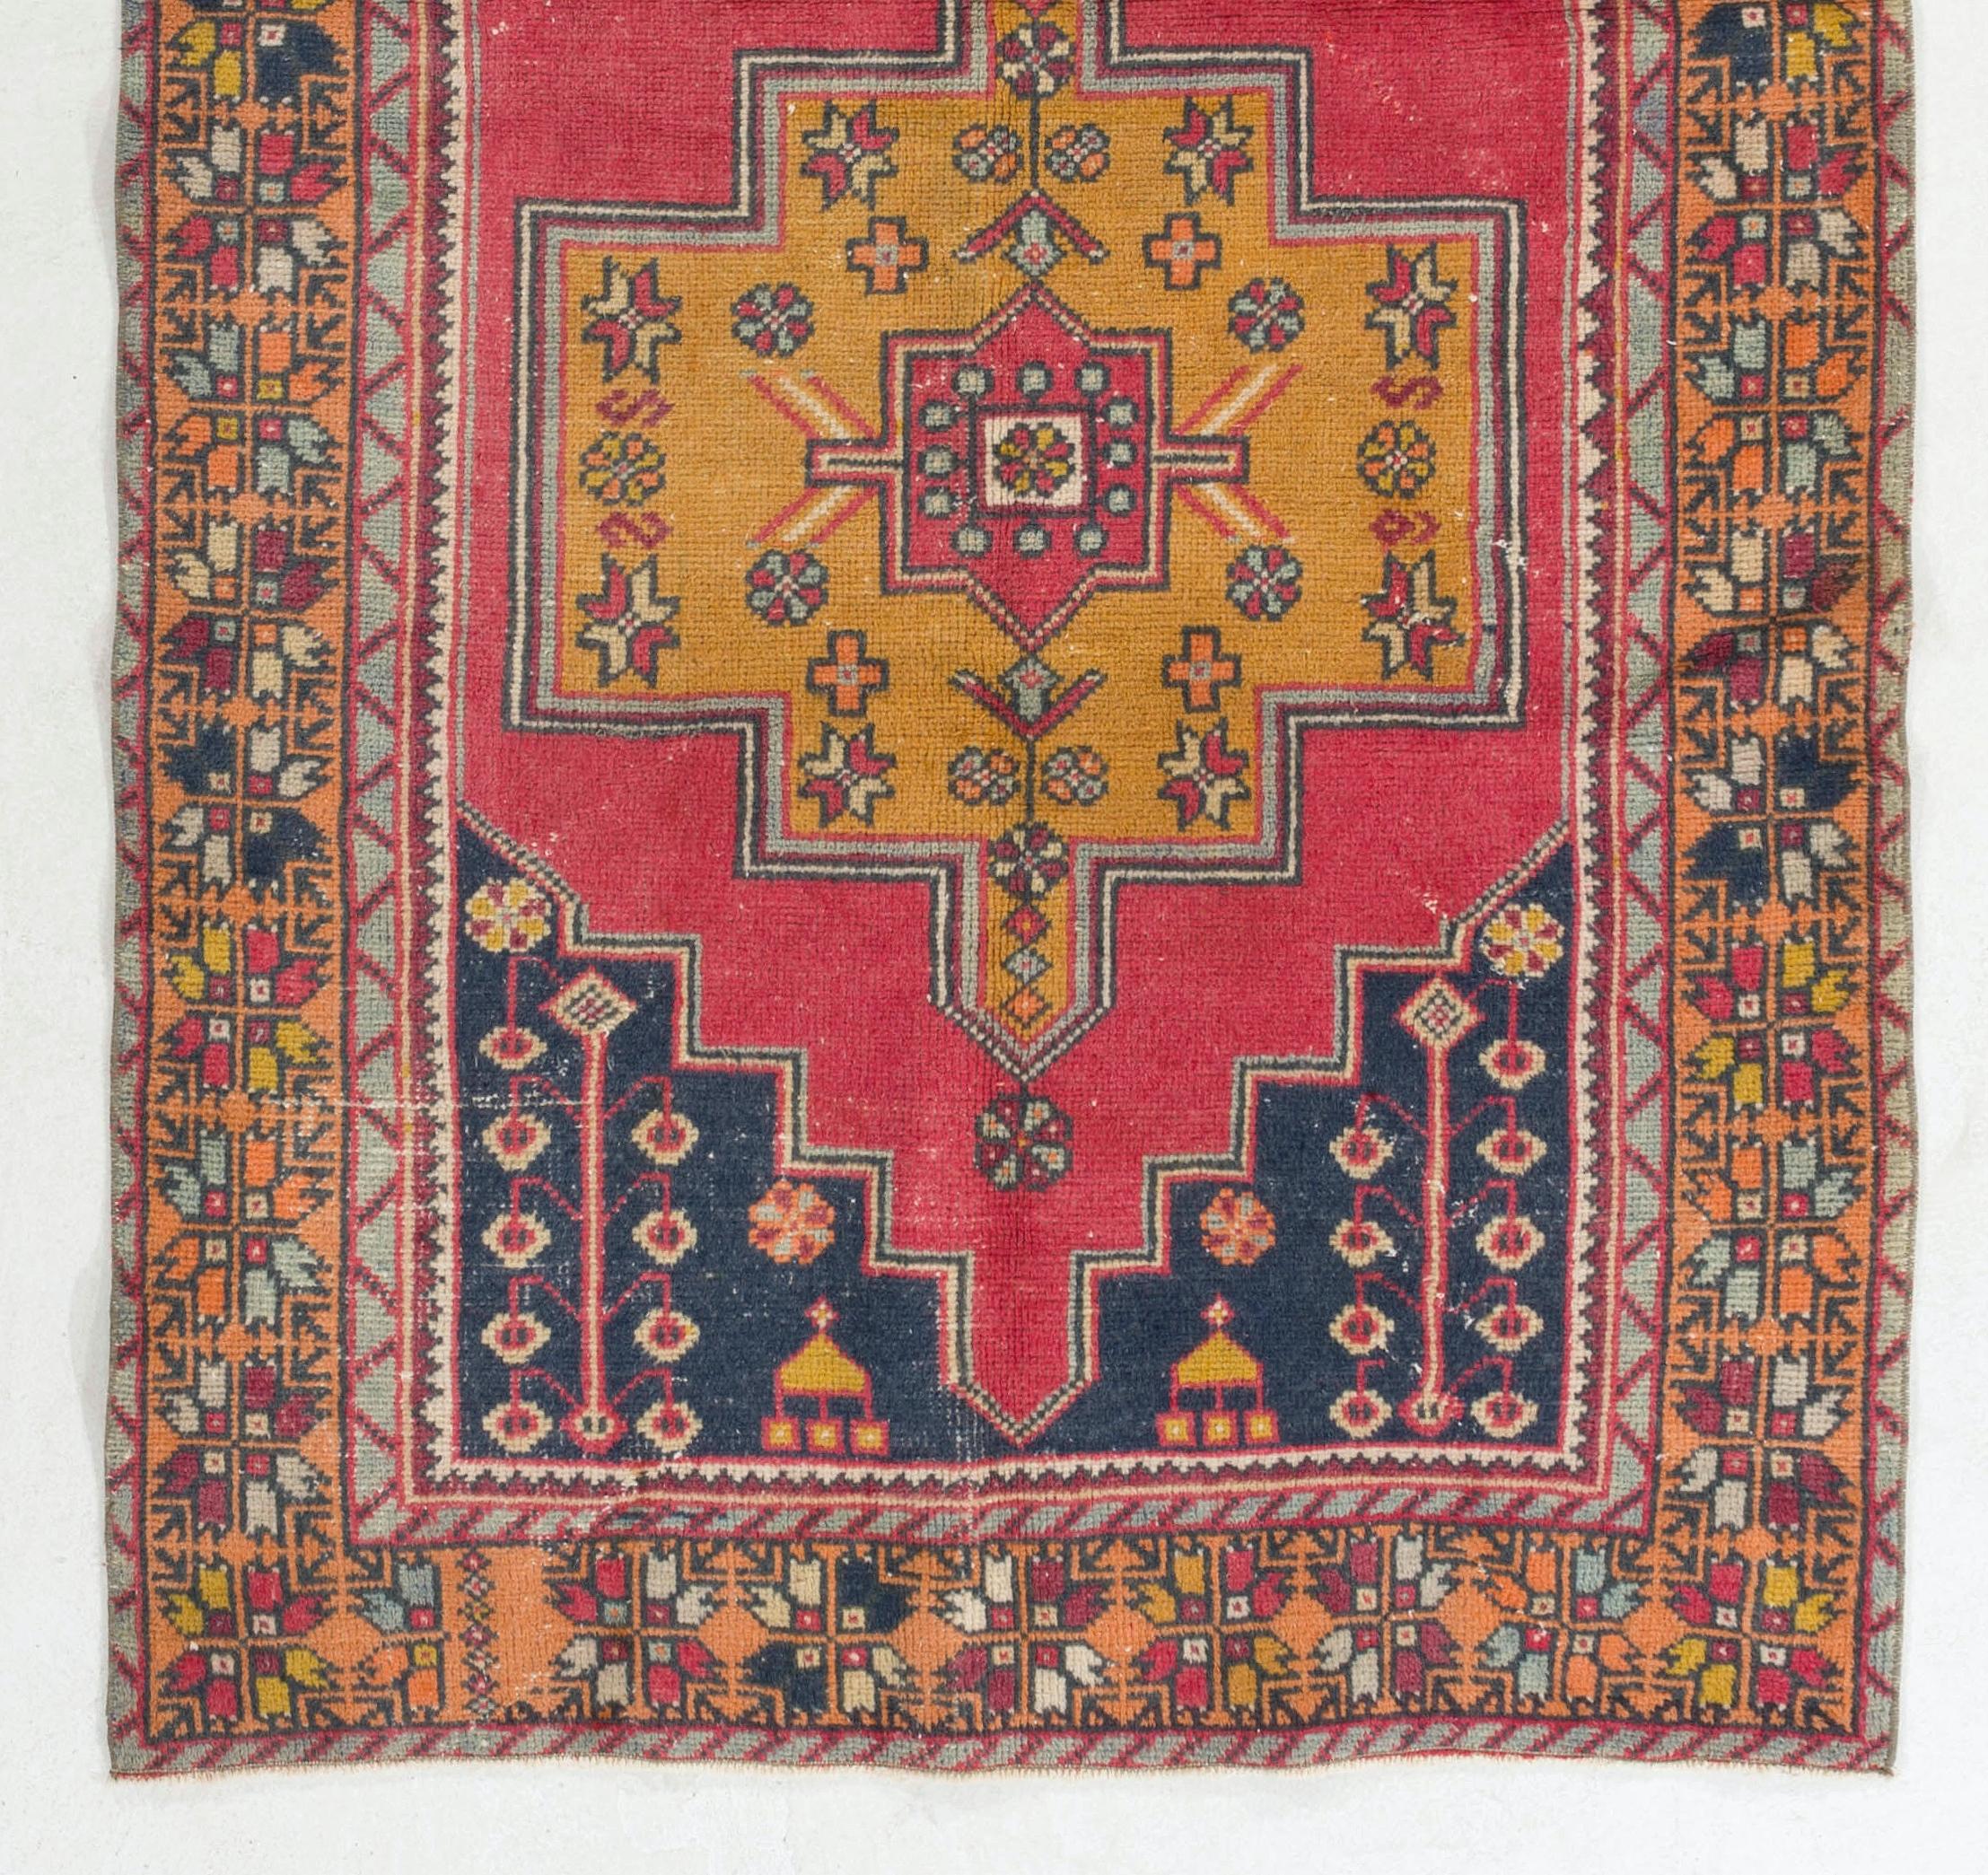 Tribal 4.2x8.2 Ft Vintage Hand Knotted Turkish Wool Rug, Red, Dark Blue & Yellow Colors For Sale